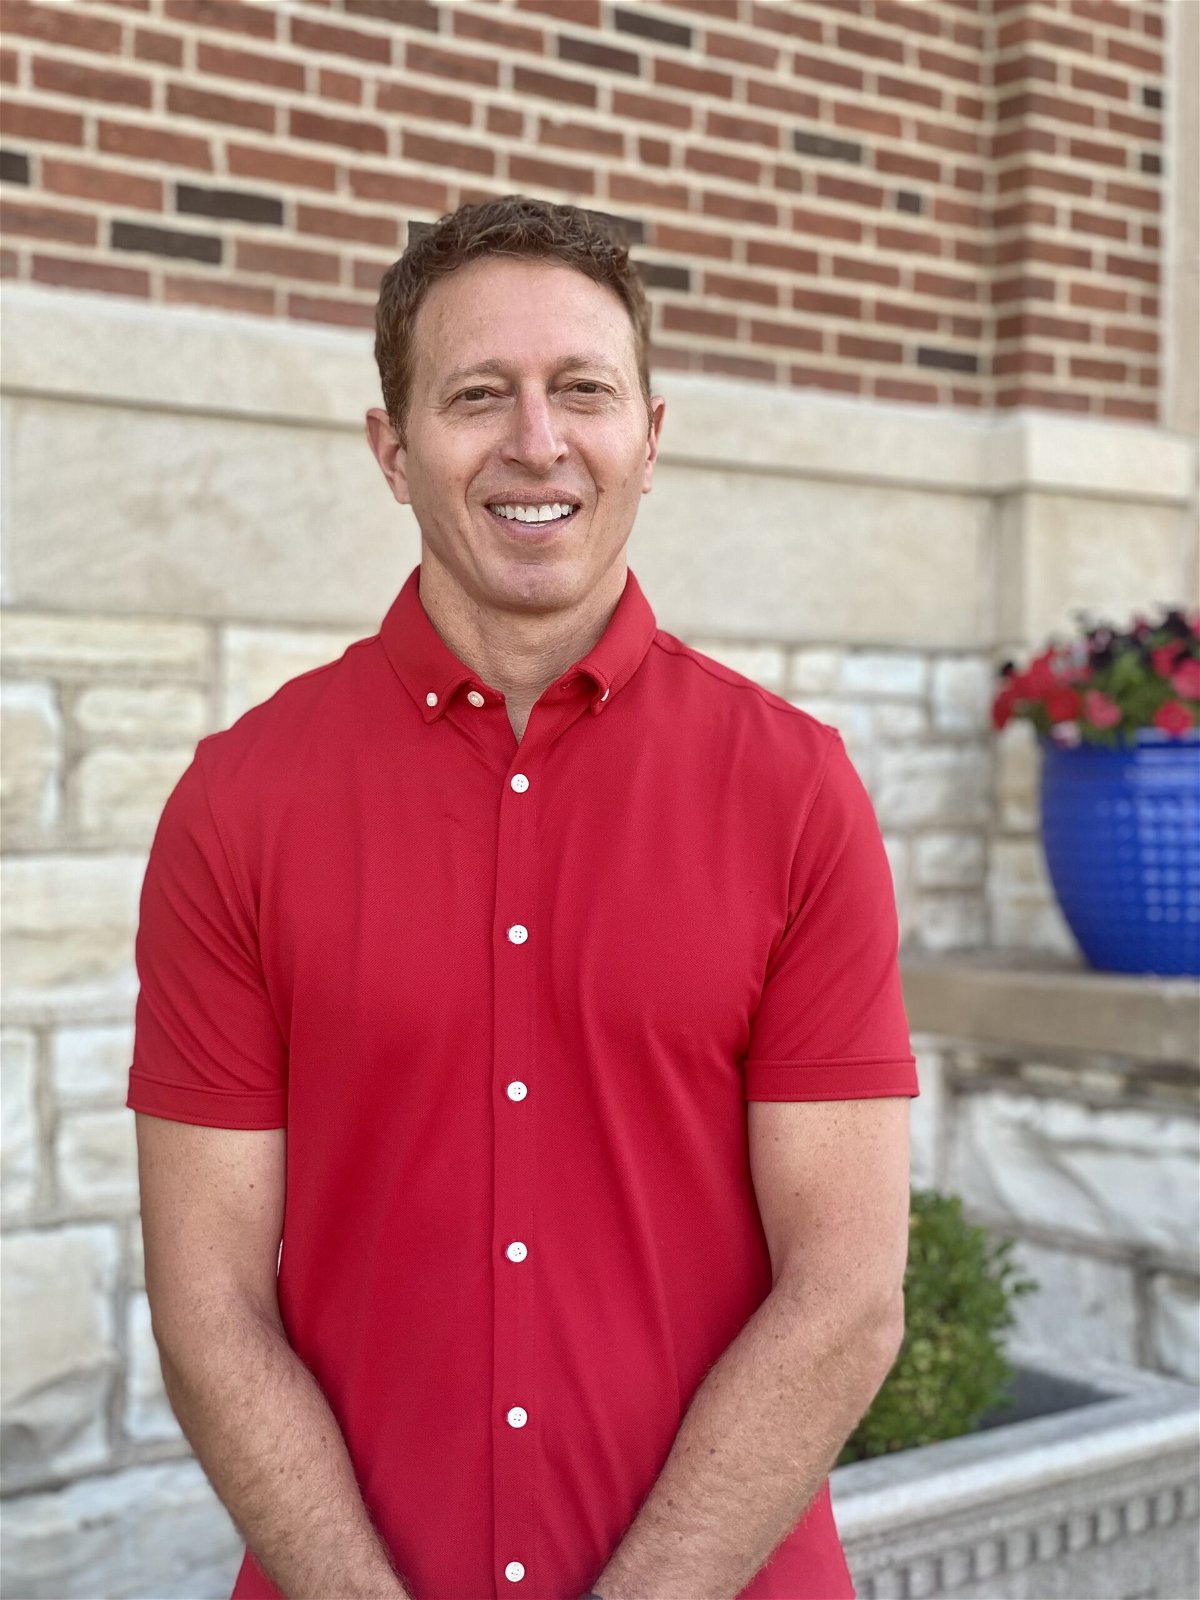 Todd Beaulieu was named the interim principal of Lewis and Clark Middle School, according to a Thursday press release from the Jefferson City School District.